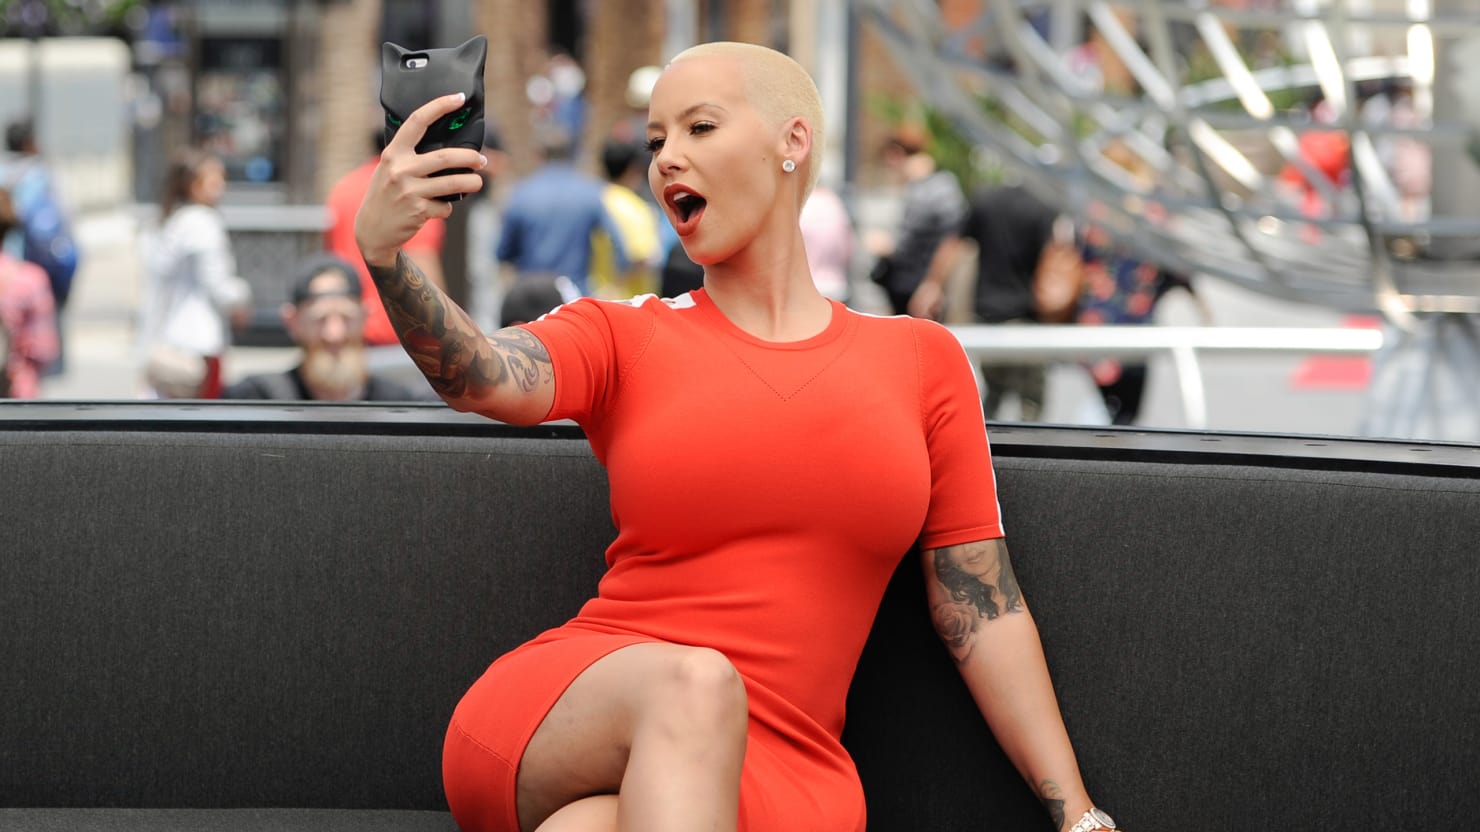 Amber Rose 1 Arena Pile Top 10 Best Butts In Hollywood 2017